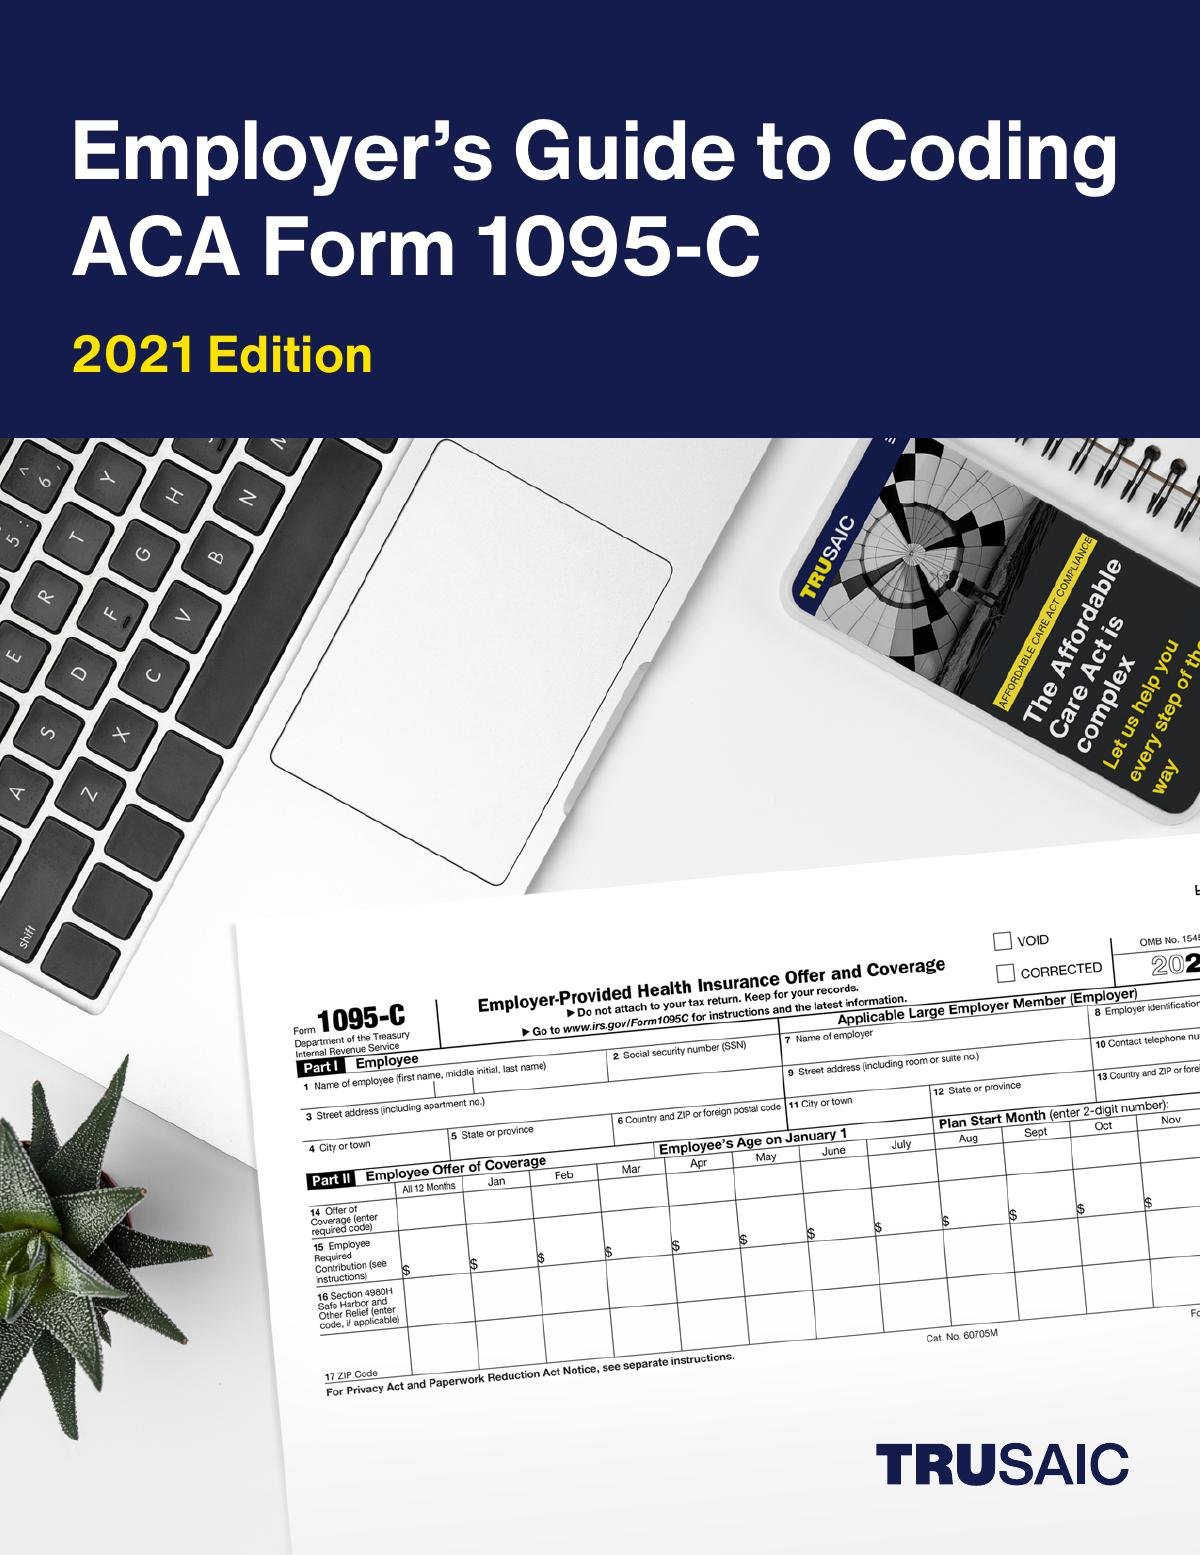 Employer’s Guide to Coding ACA Form 1095-C